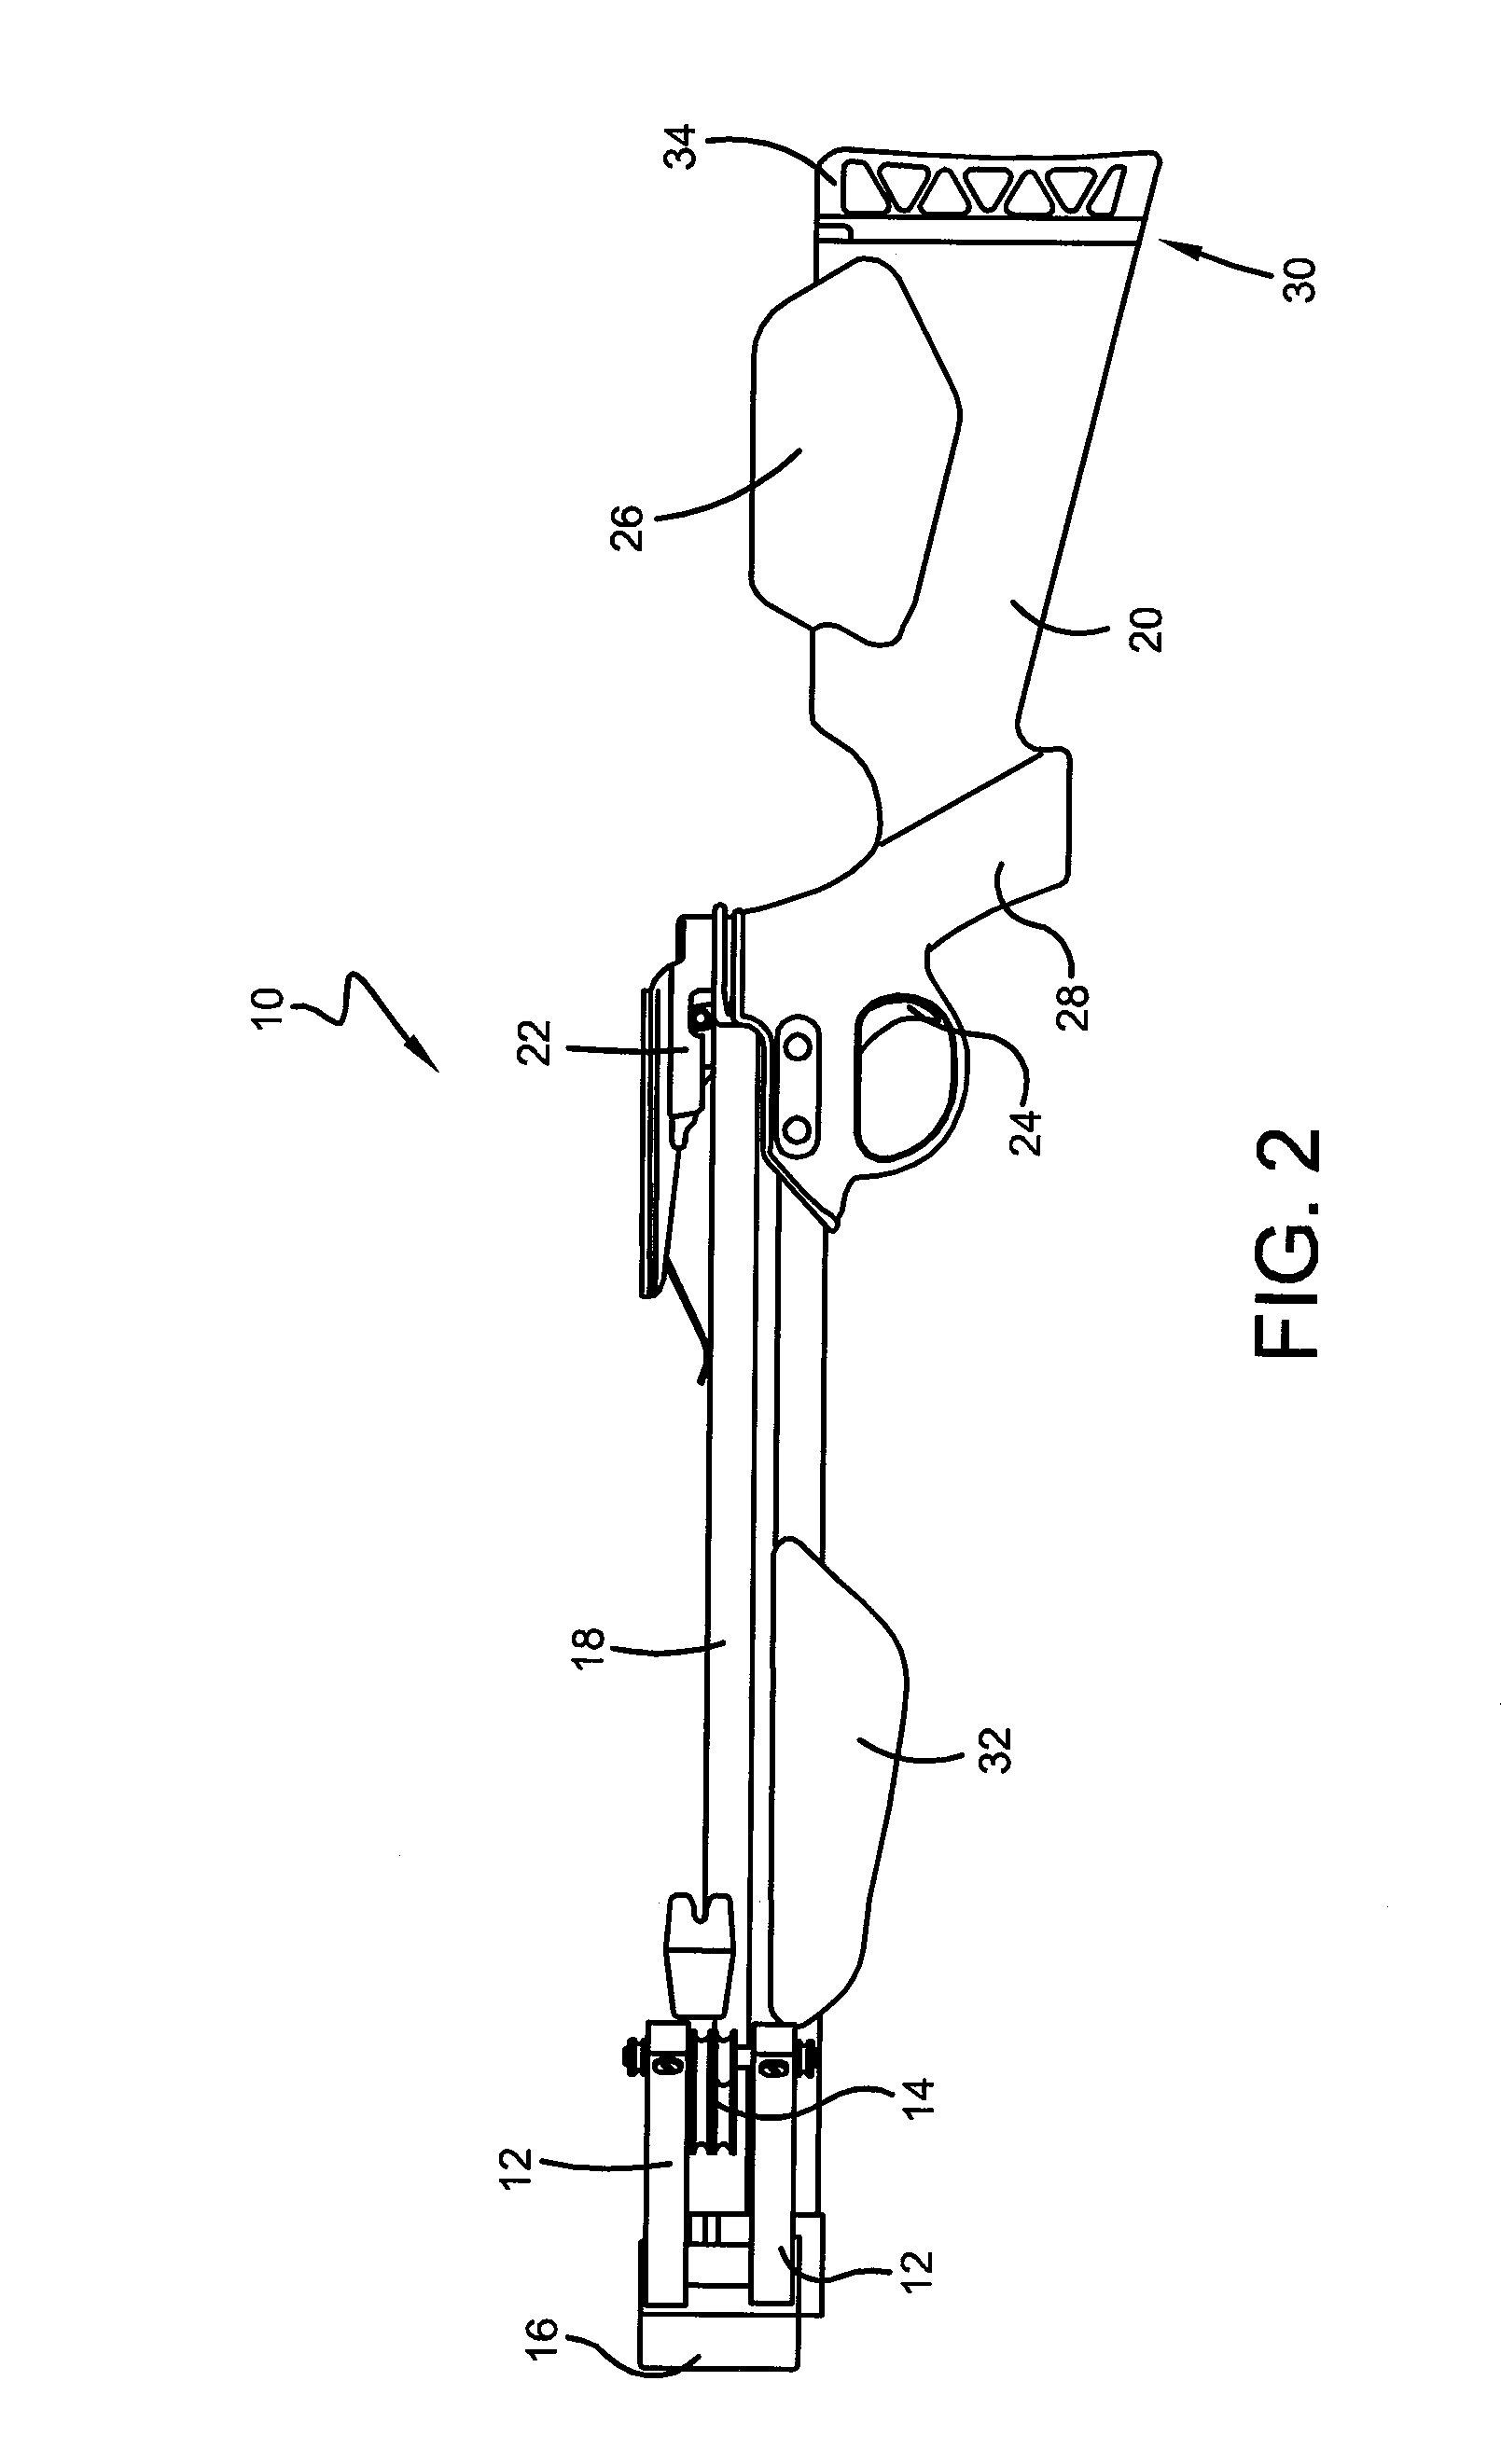 Crossbow and components attached by a sliding joint assembly